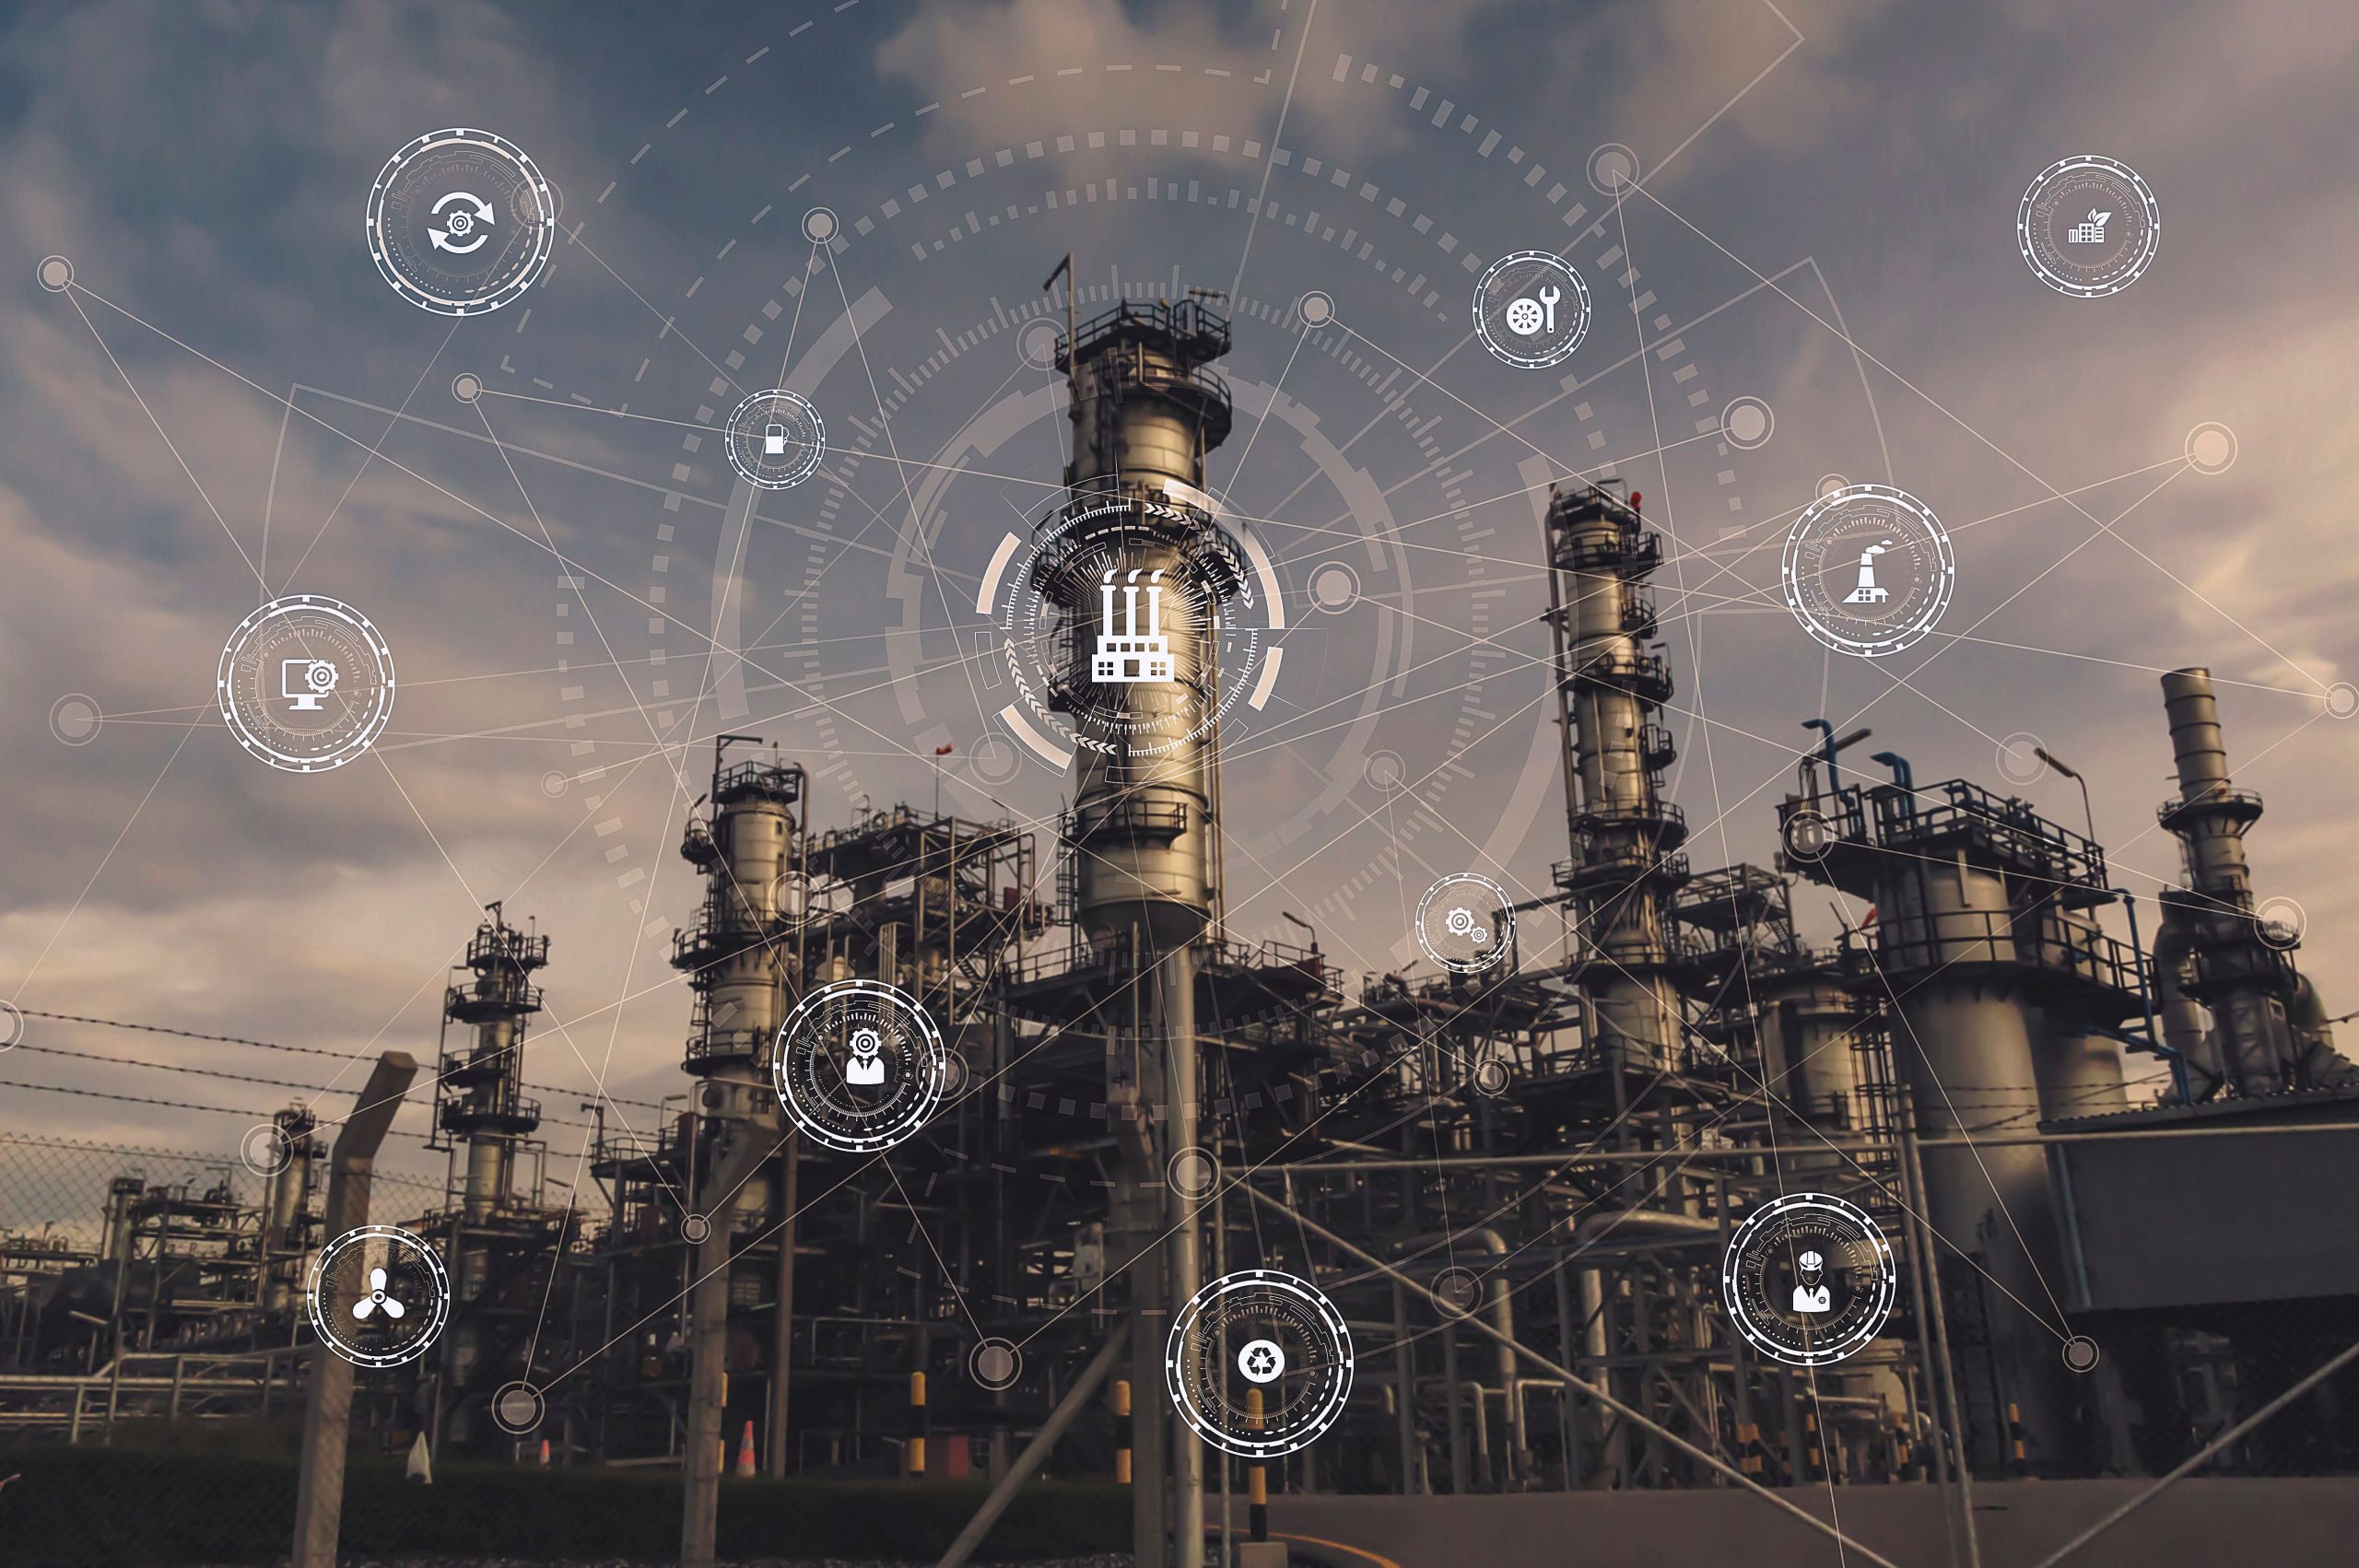 What’s Next for Industry 4.0?